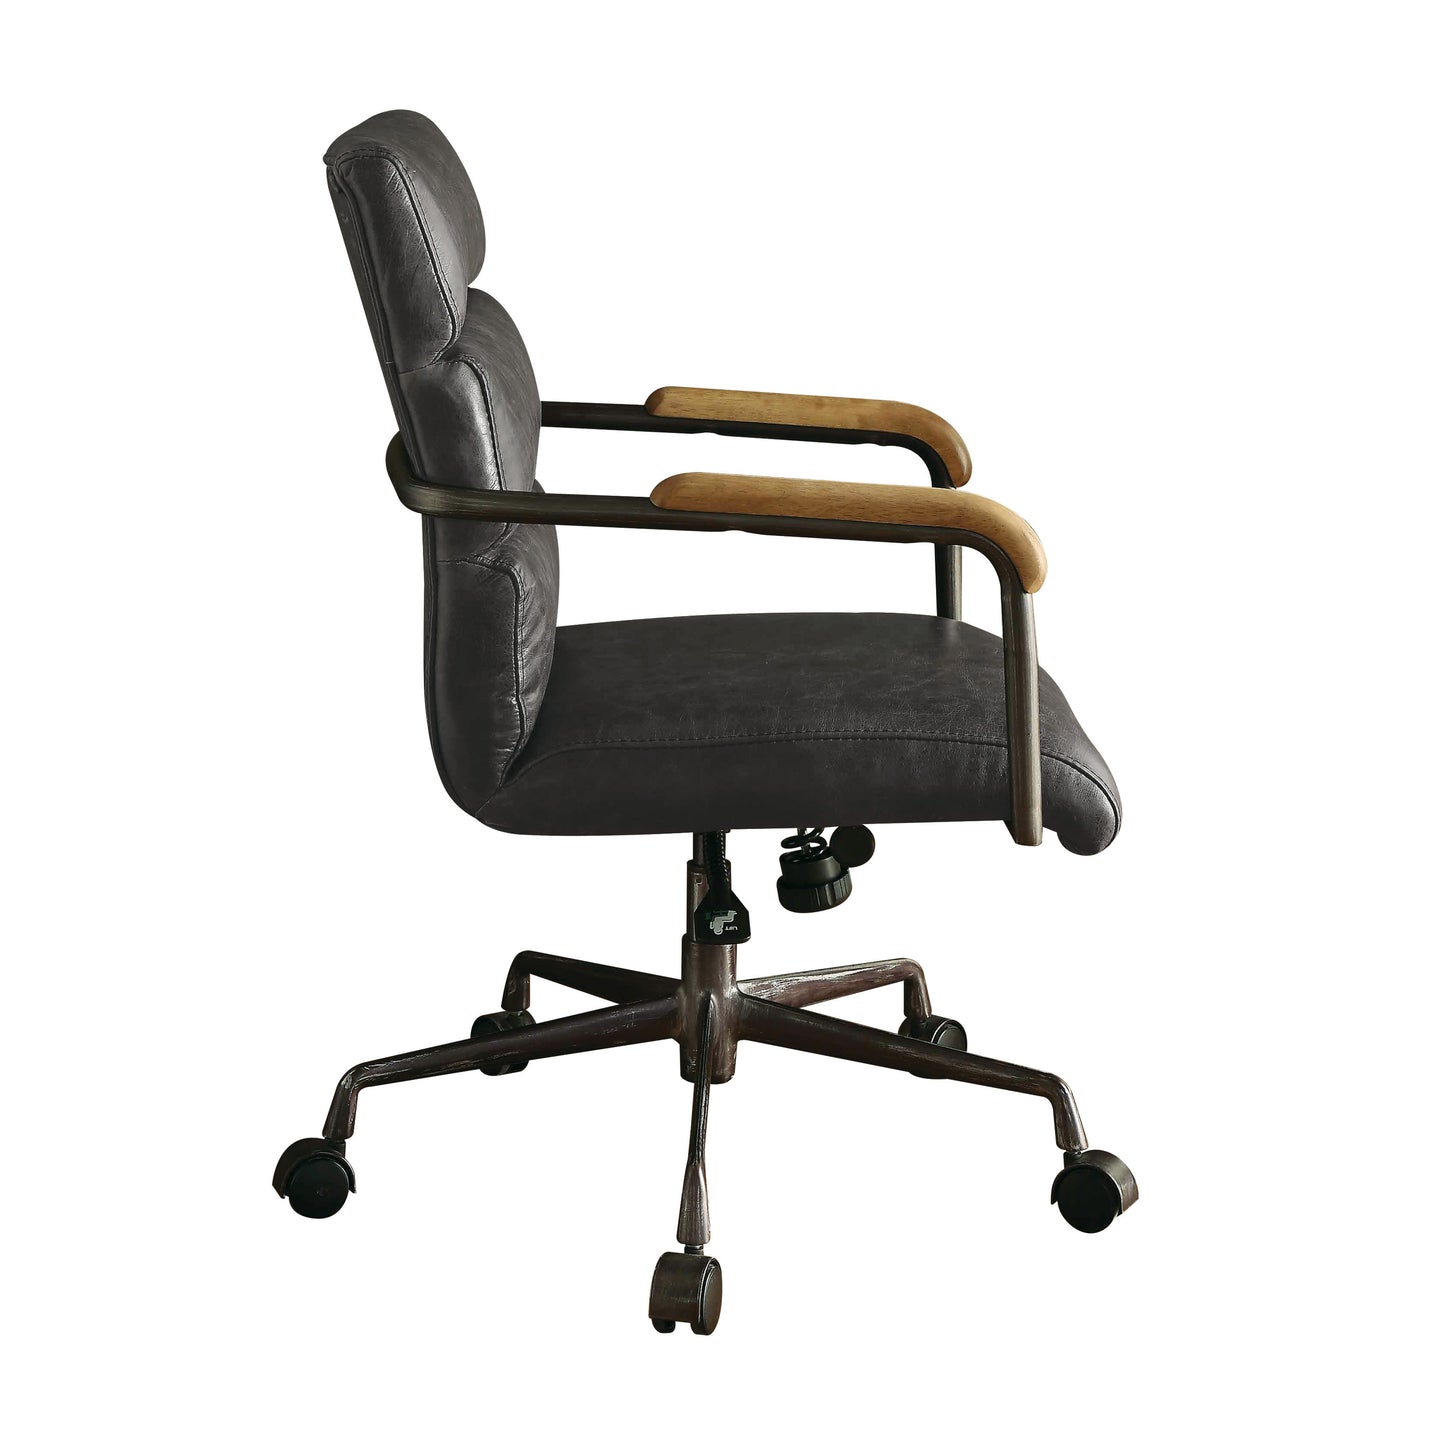 ACME Harith Office Chair in Antique Slate Top Grain Leather